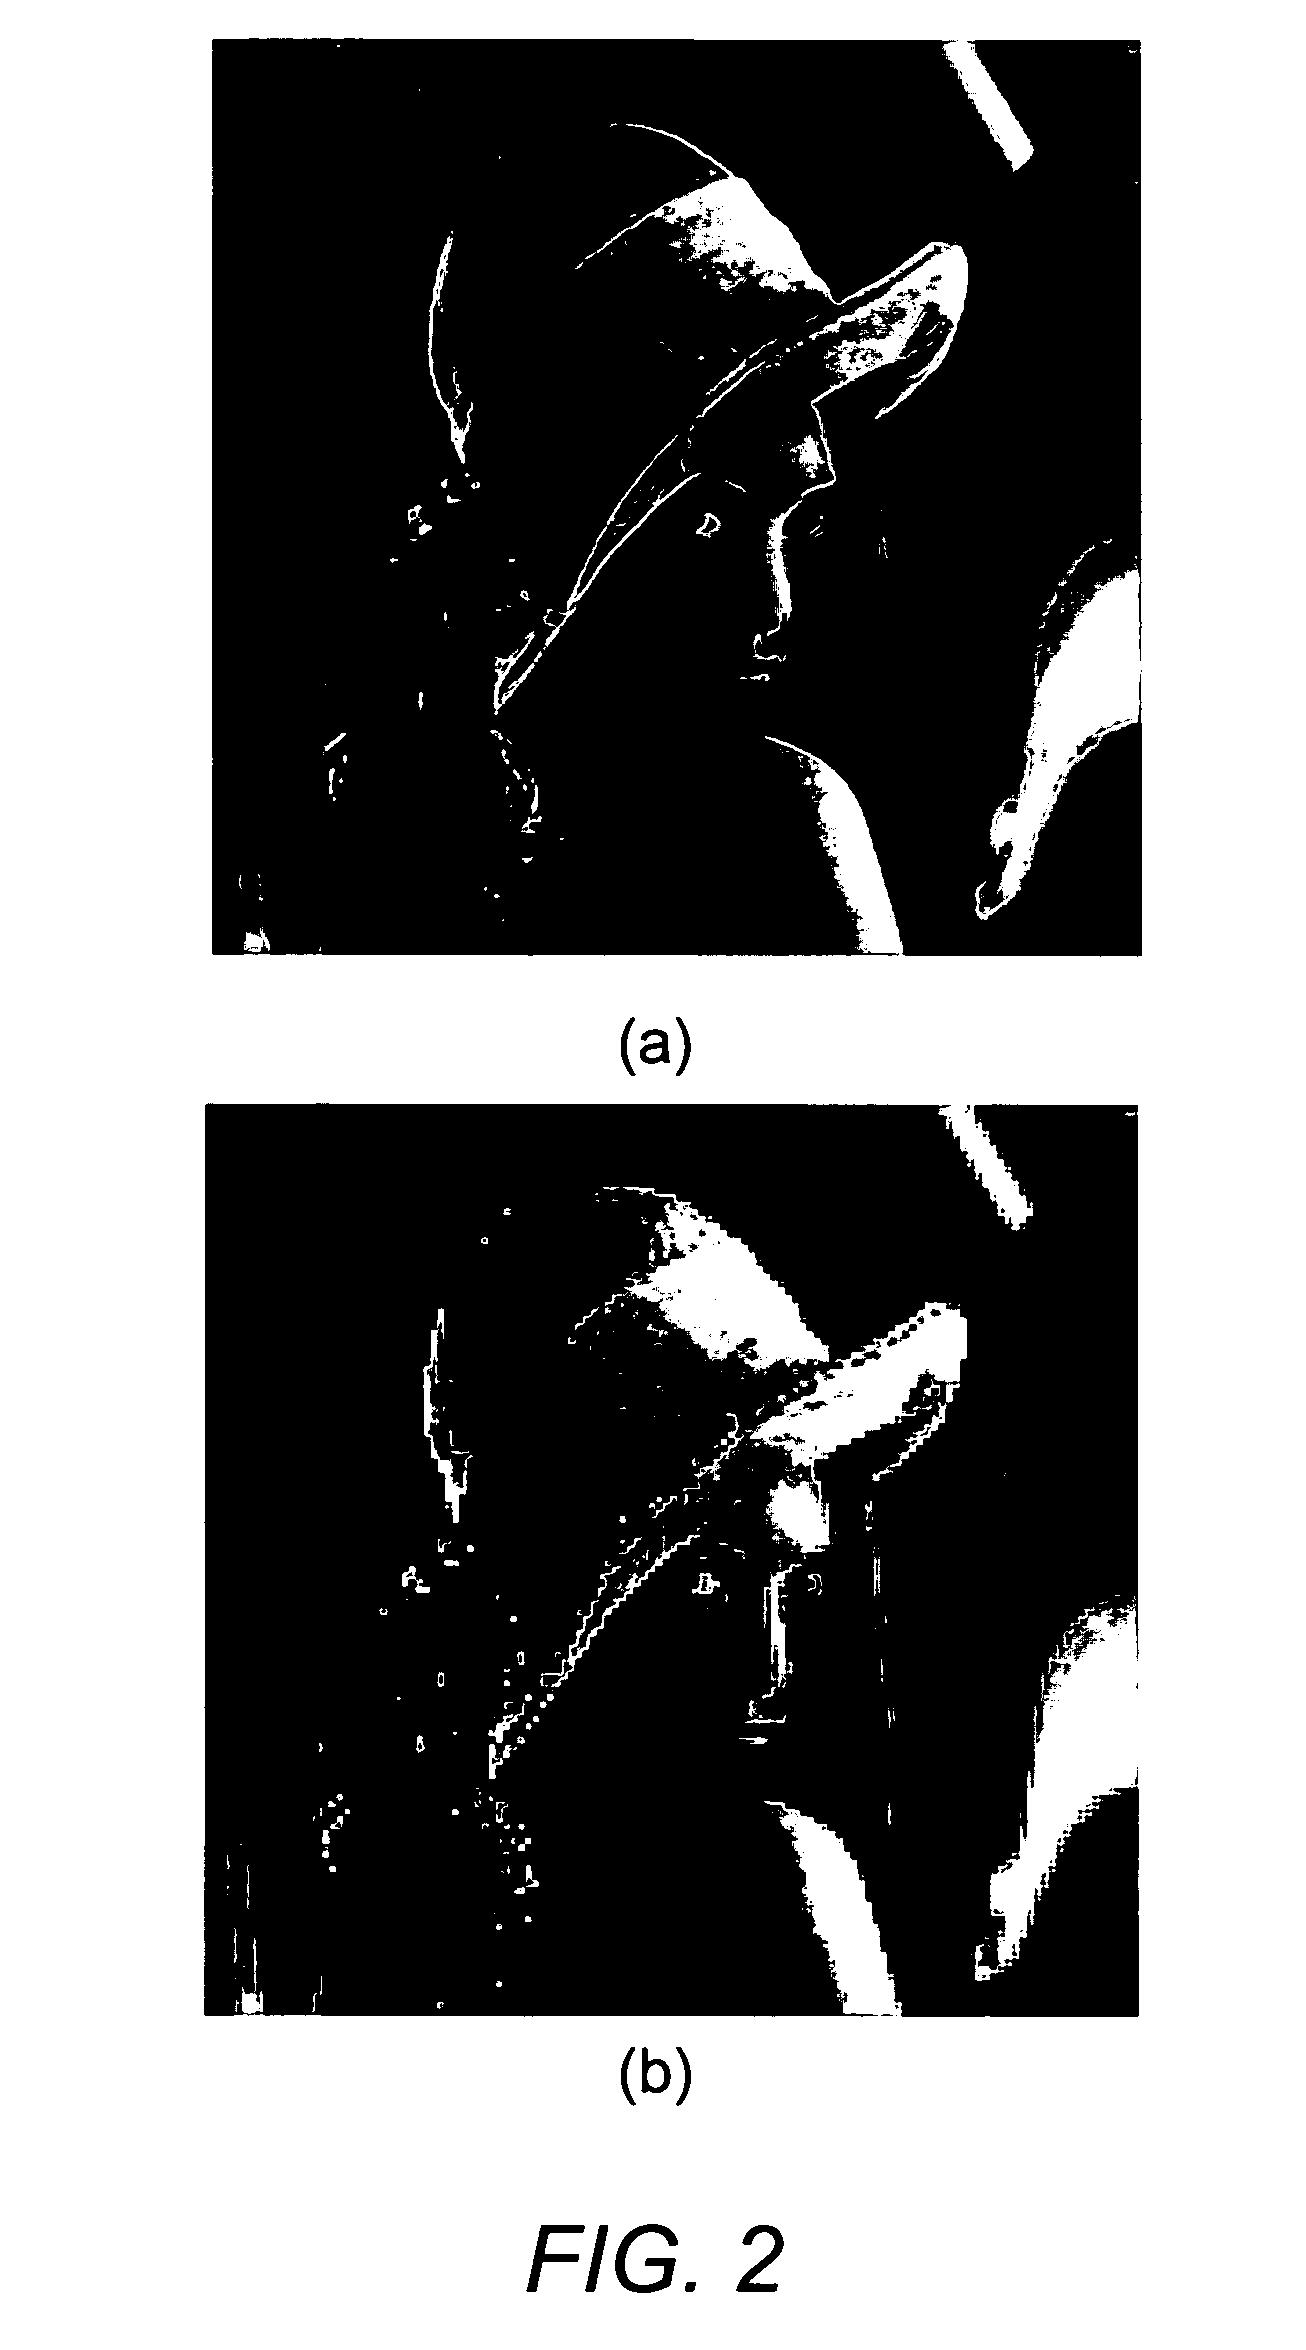 Robust reconstruction of high resolution grayscale images from a sequence of low resolution frames